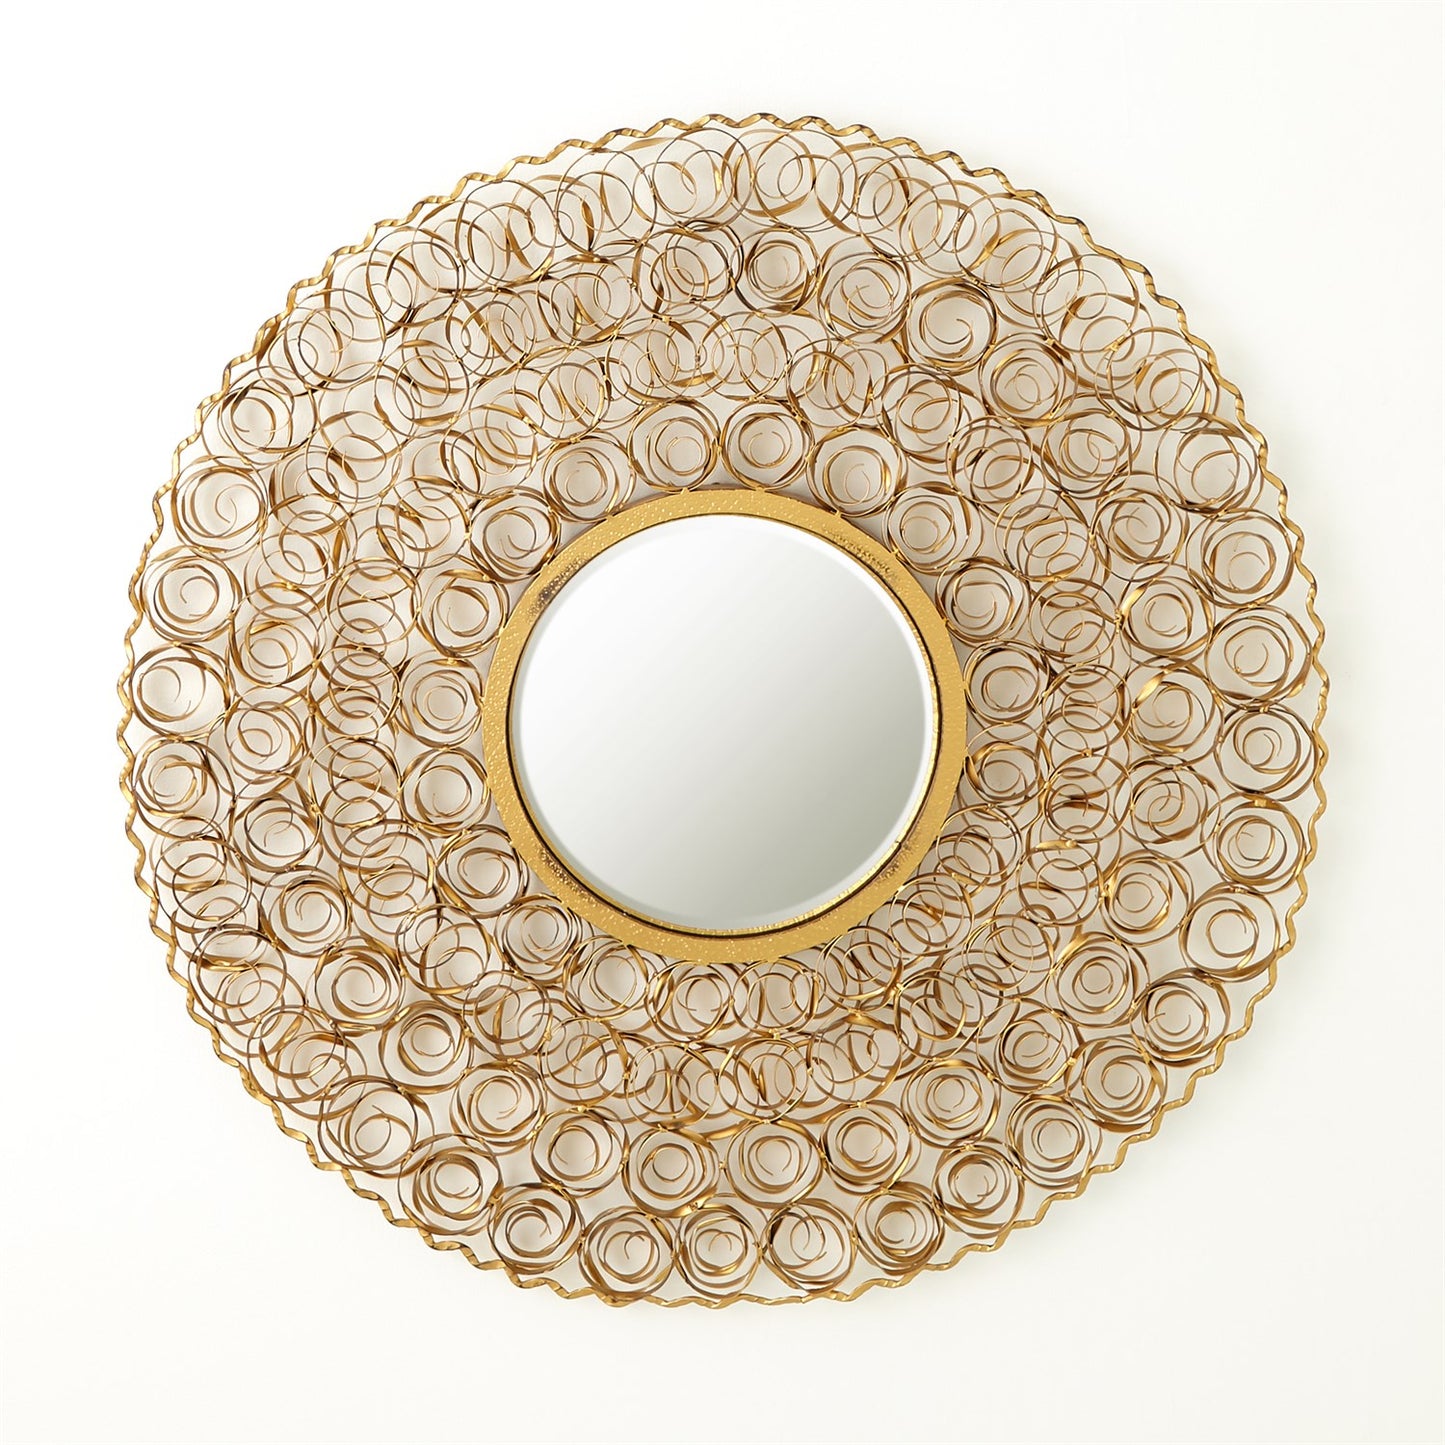 CURLY MIRROR-ANTIQUE GOLD